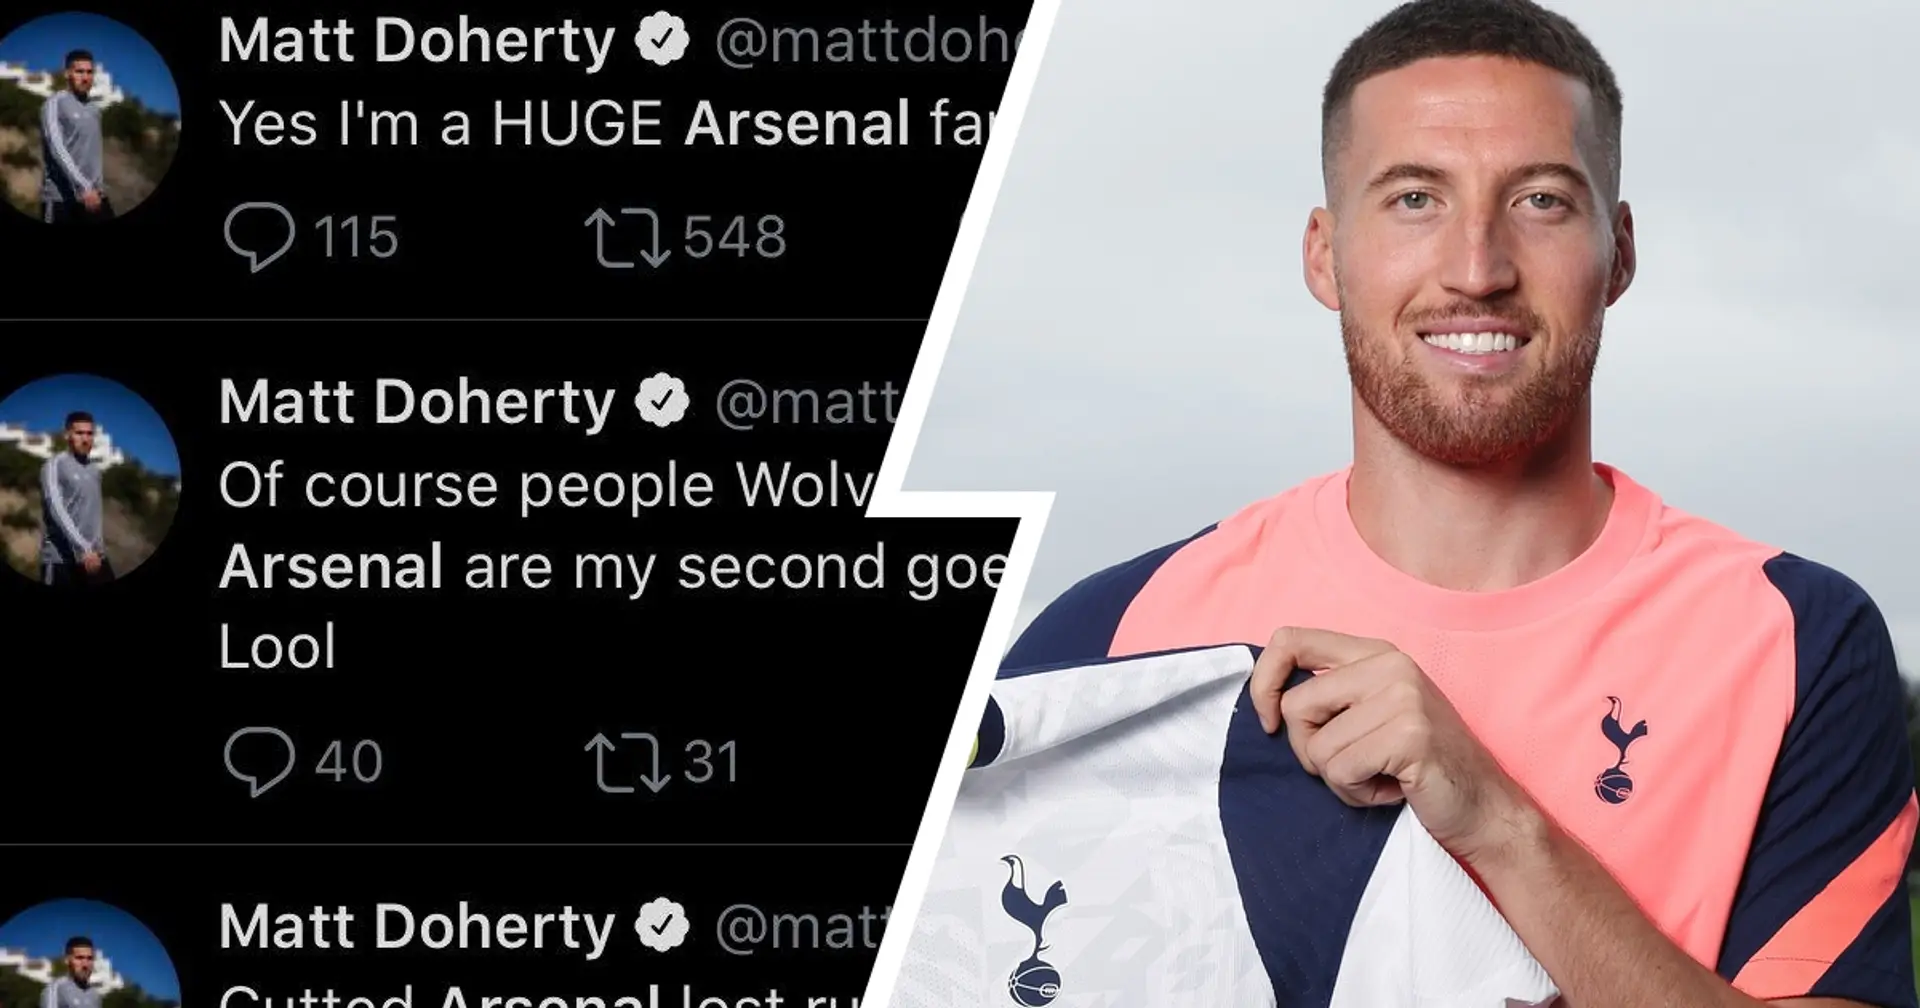 Spurs' Doherty admits being 'embarrassed' by his old Arsenal tweets, reveals 'unusual' reason for his love for Gunners